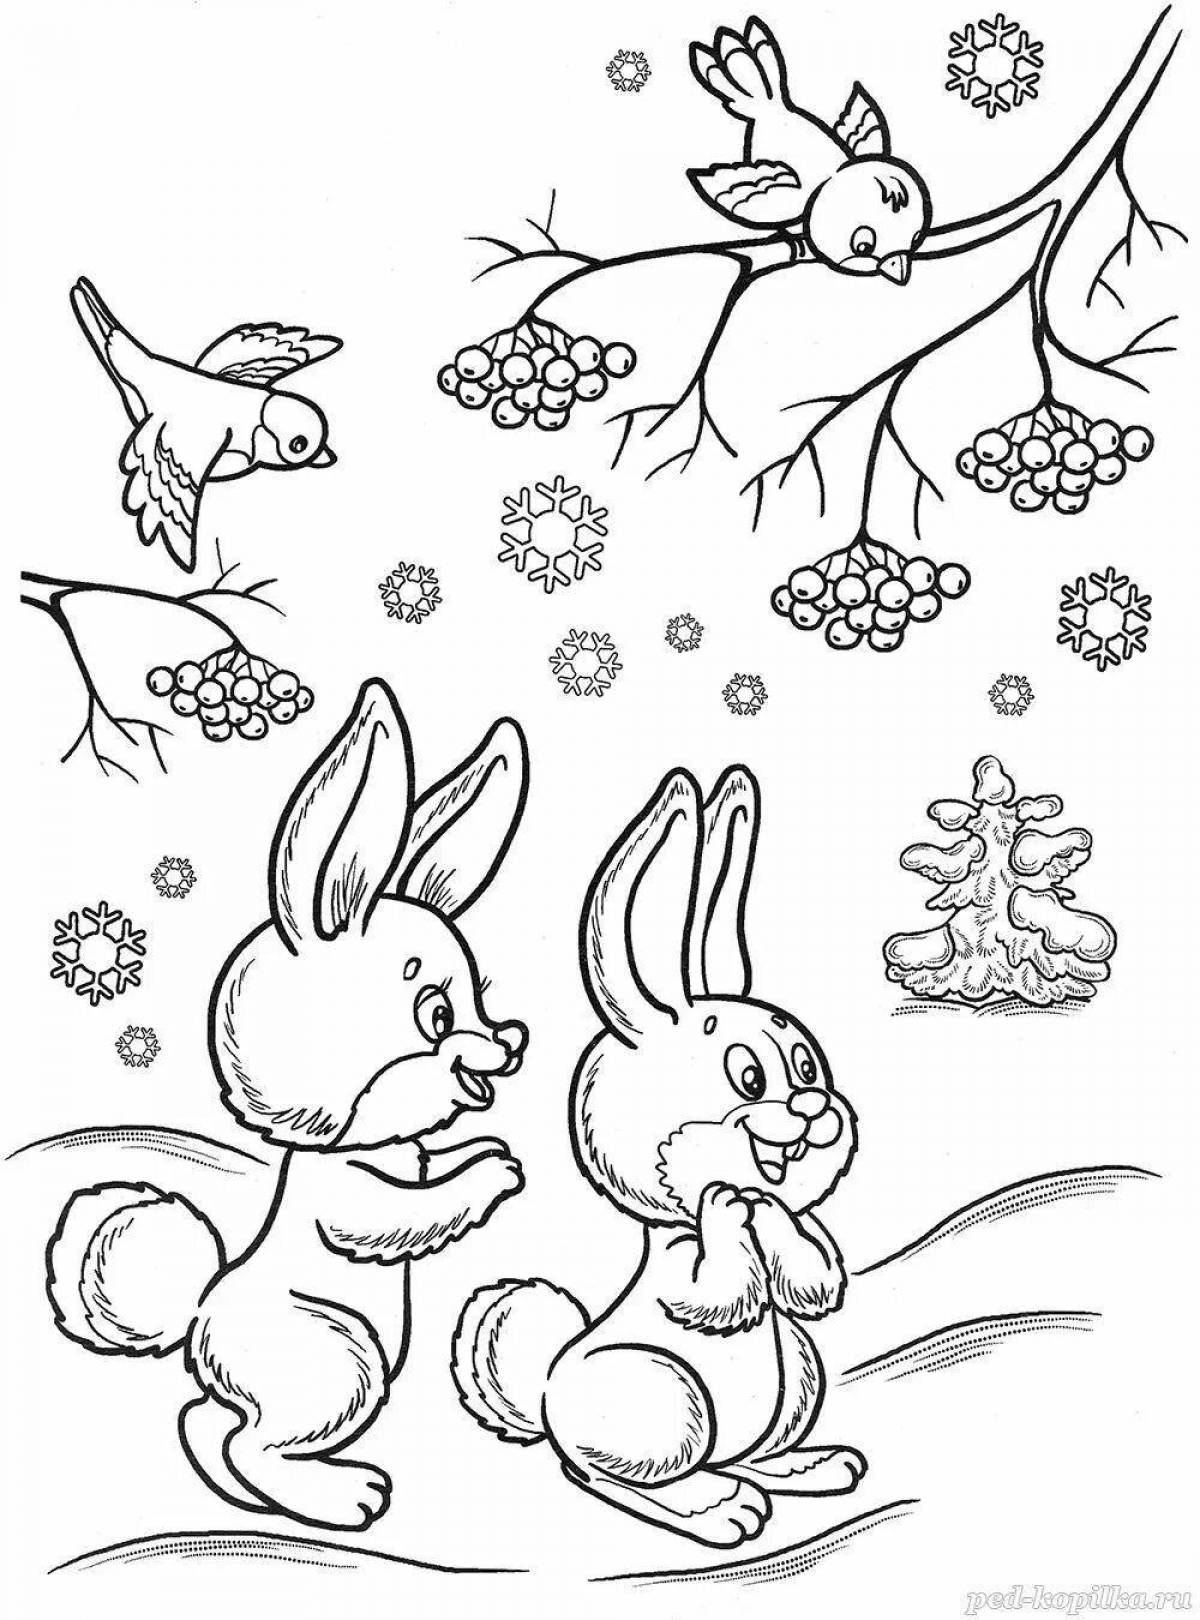 Coloring page blissful hare and tree